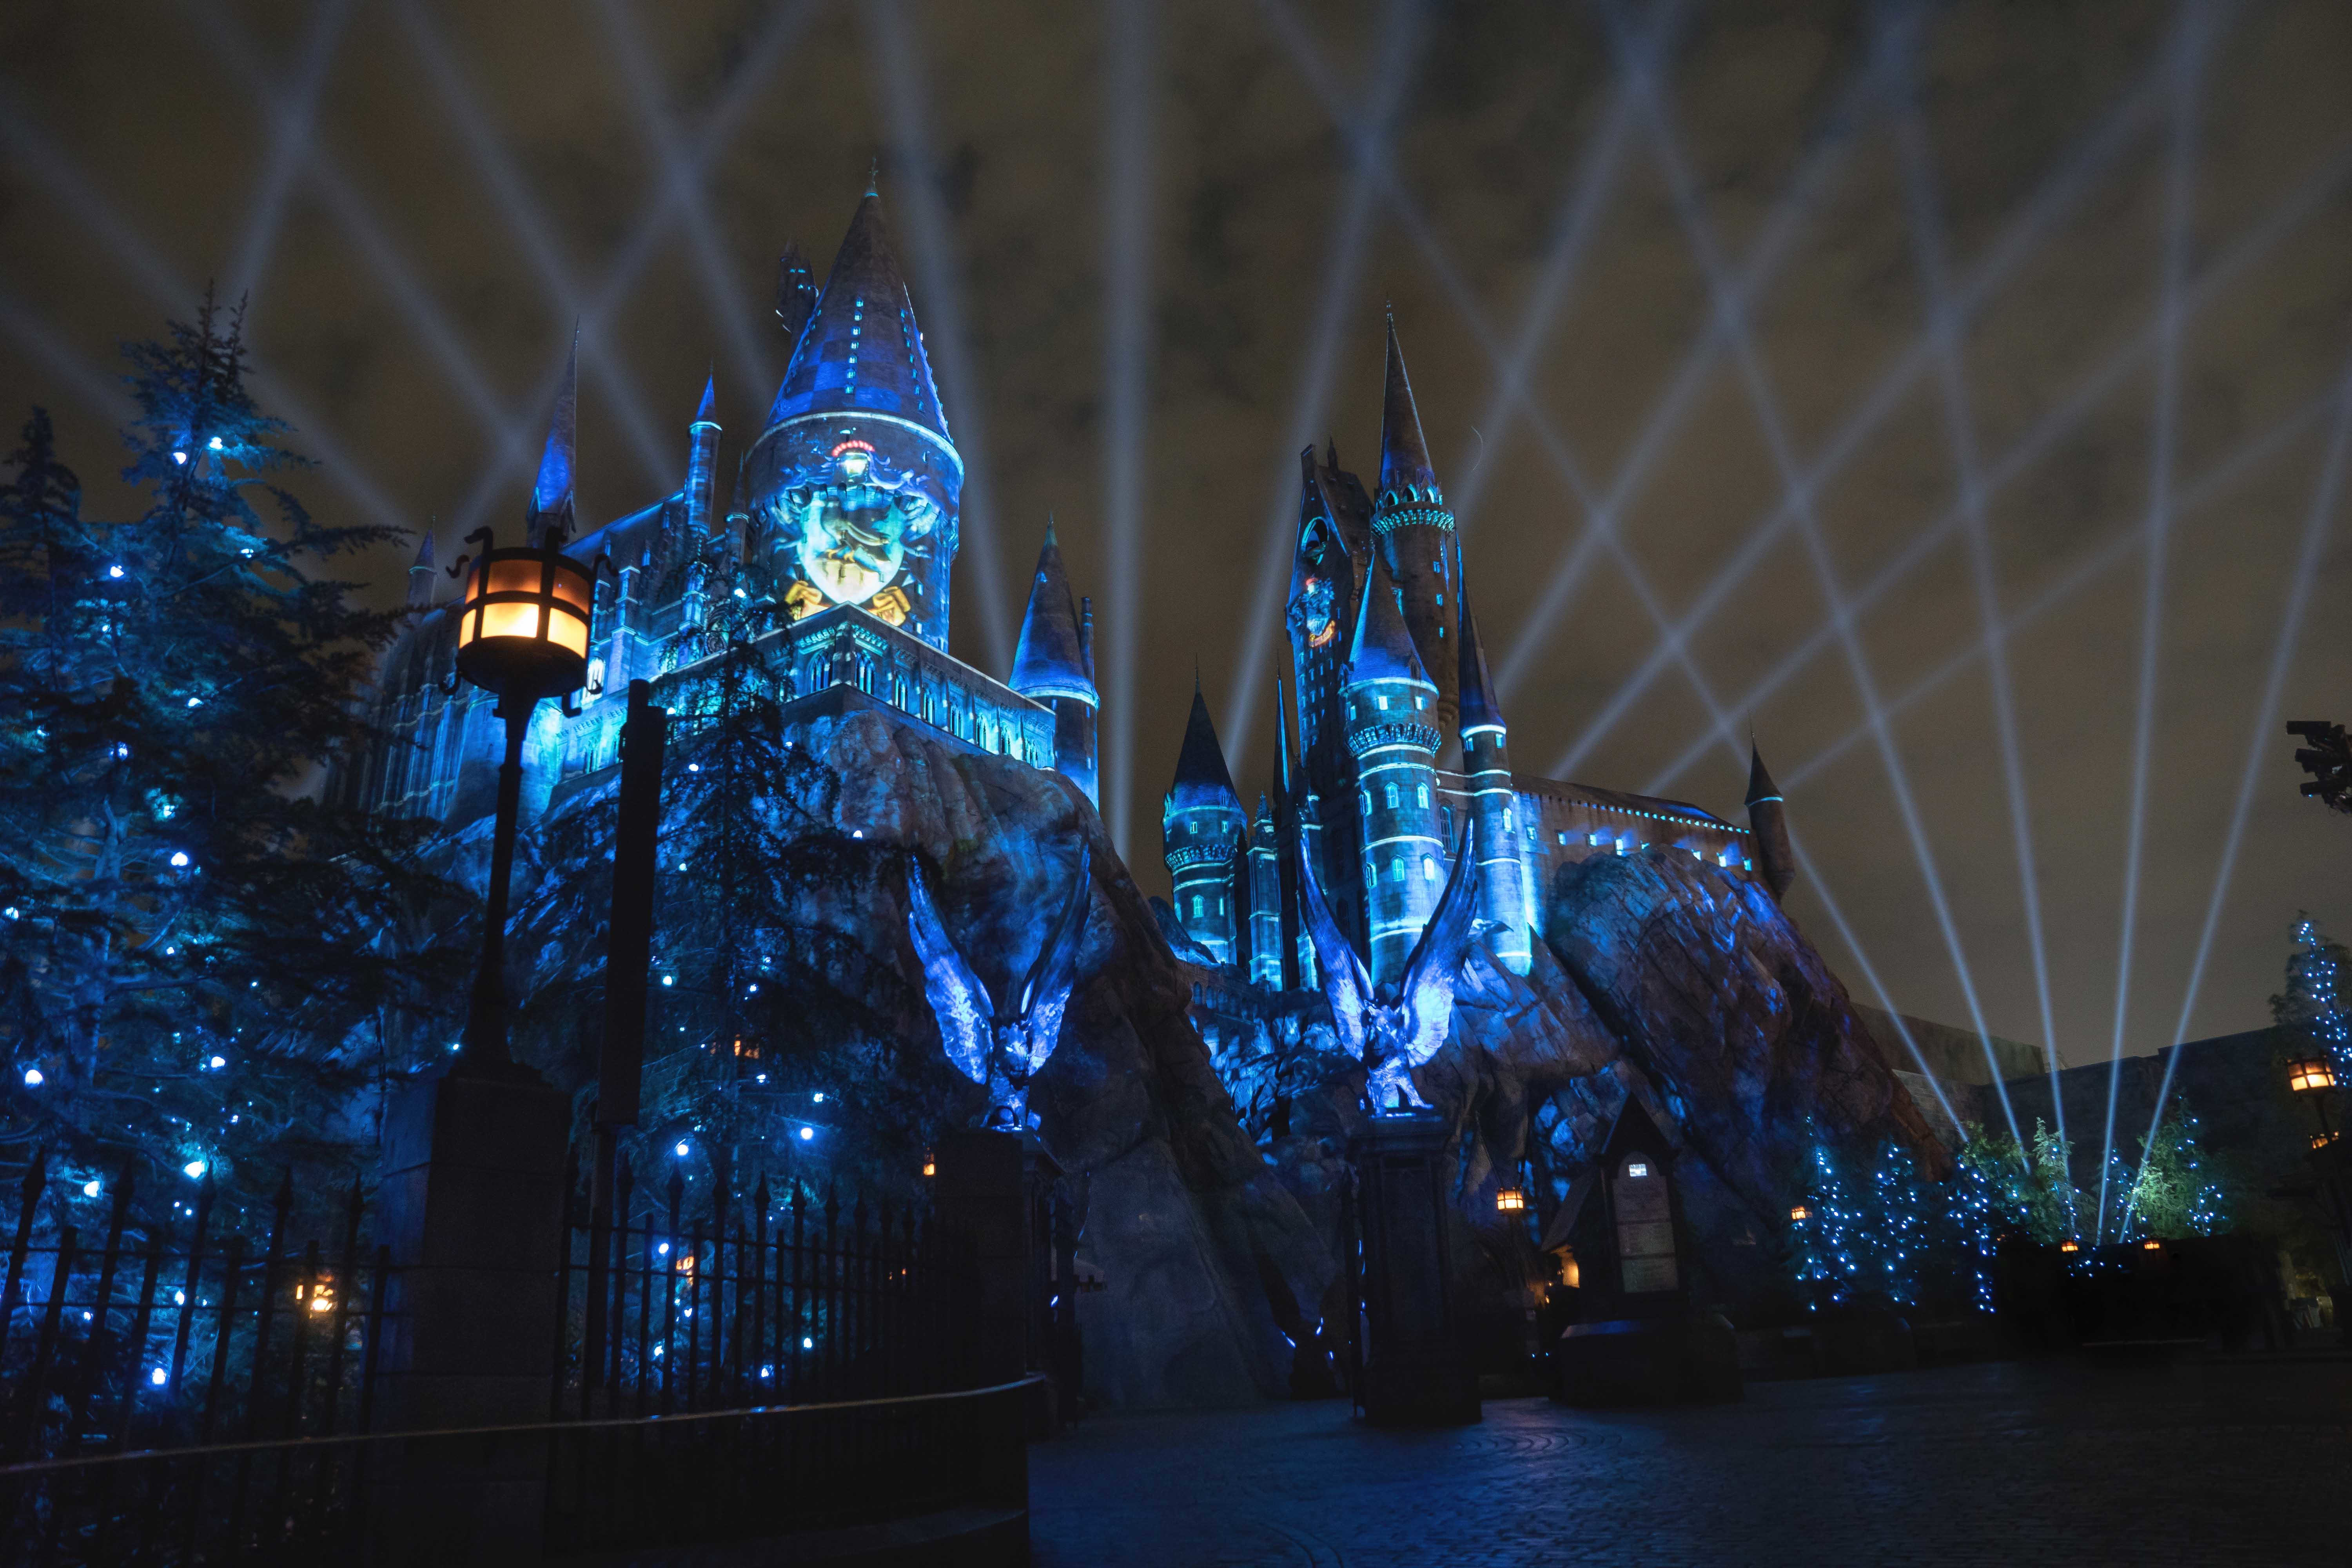 5 things to know before seeing The Nighttime Lights at Hogwarts Castle